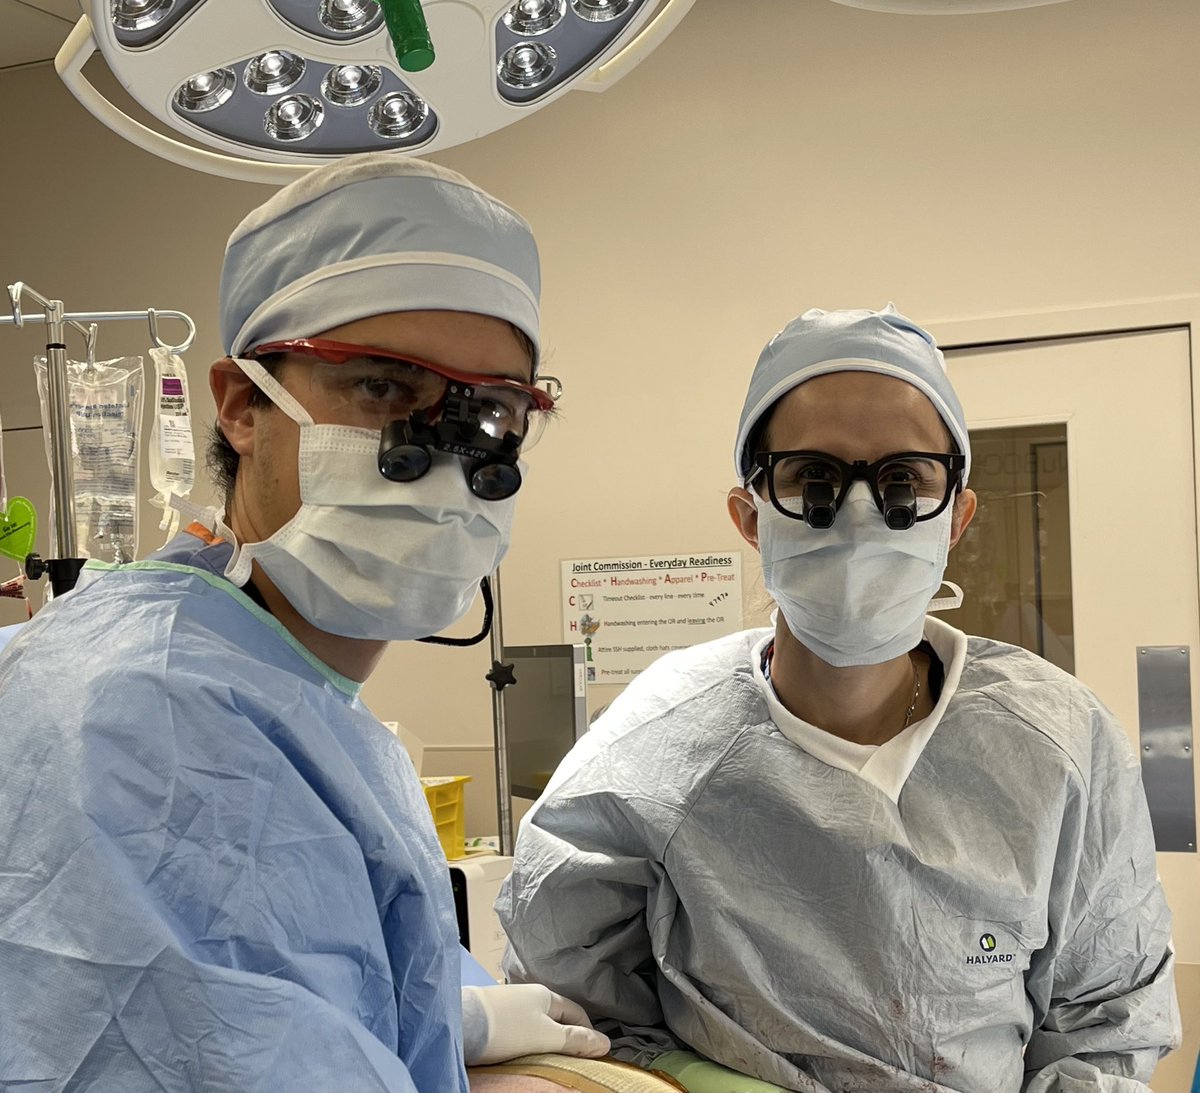 ✅ 1st day of PGY-2
✅ 1st day operating with @TFaggionVinholo! Been following her footsteps all intern year!!
✅ 1st aorto-bifem
❌ knowing how to “smize” 
#BrighamTrained
@southshorehosp @BrighamThoracic